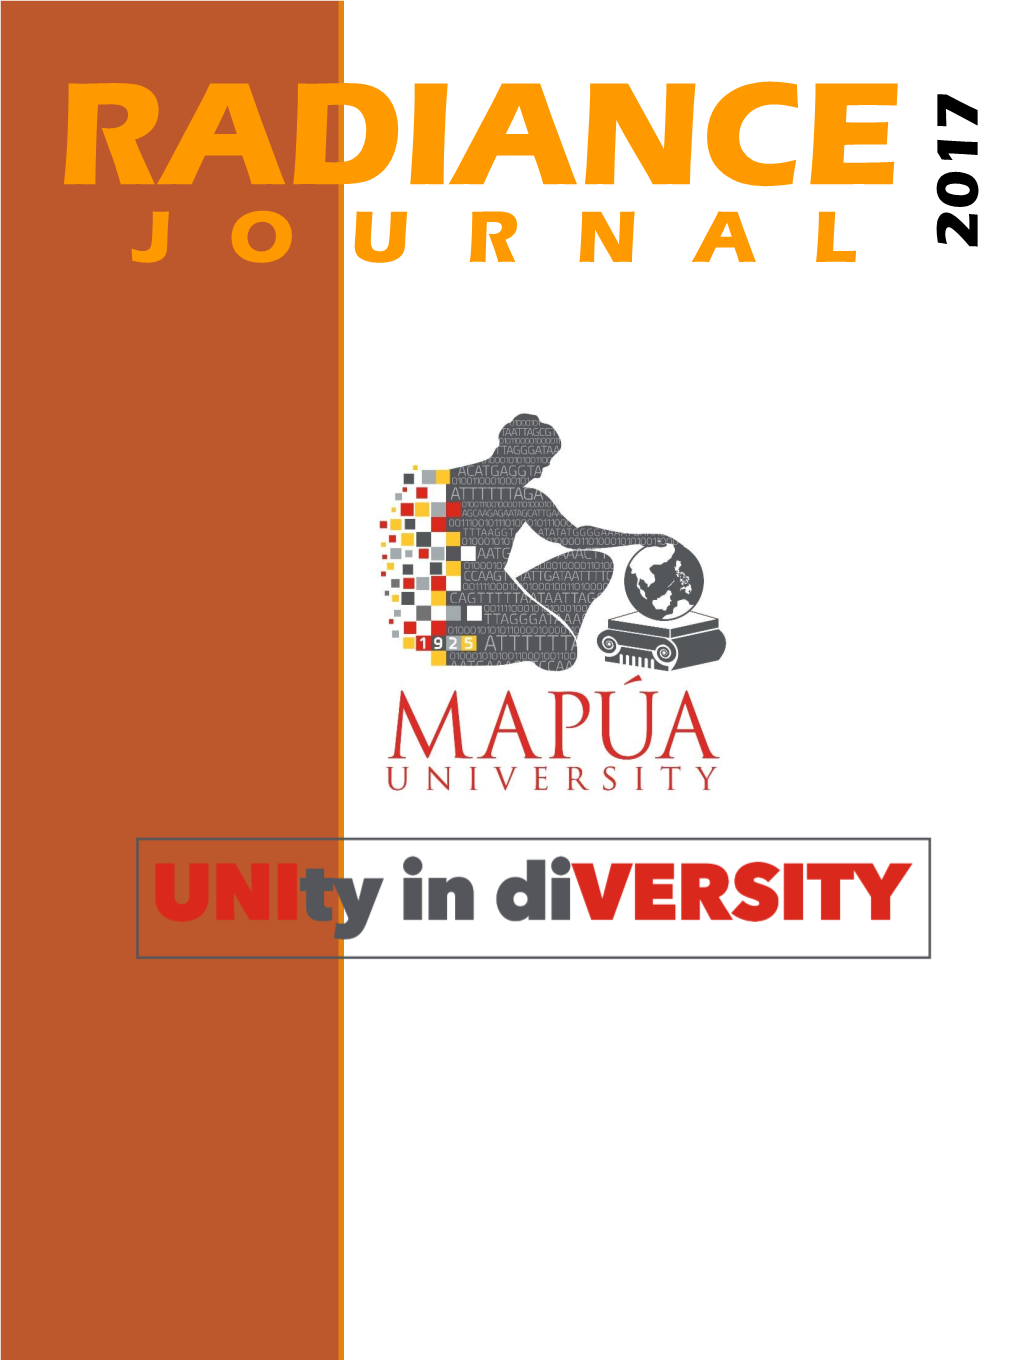 Radiance 2017: the Official Extension Service Journal of the Mapúa University